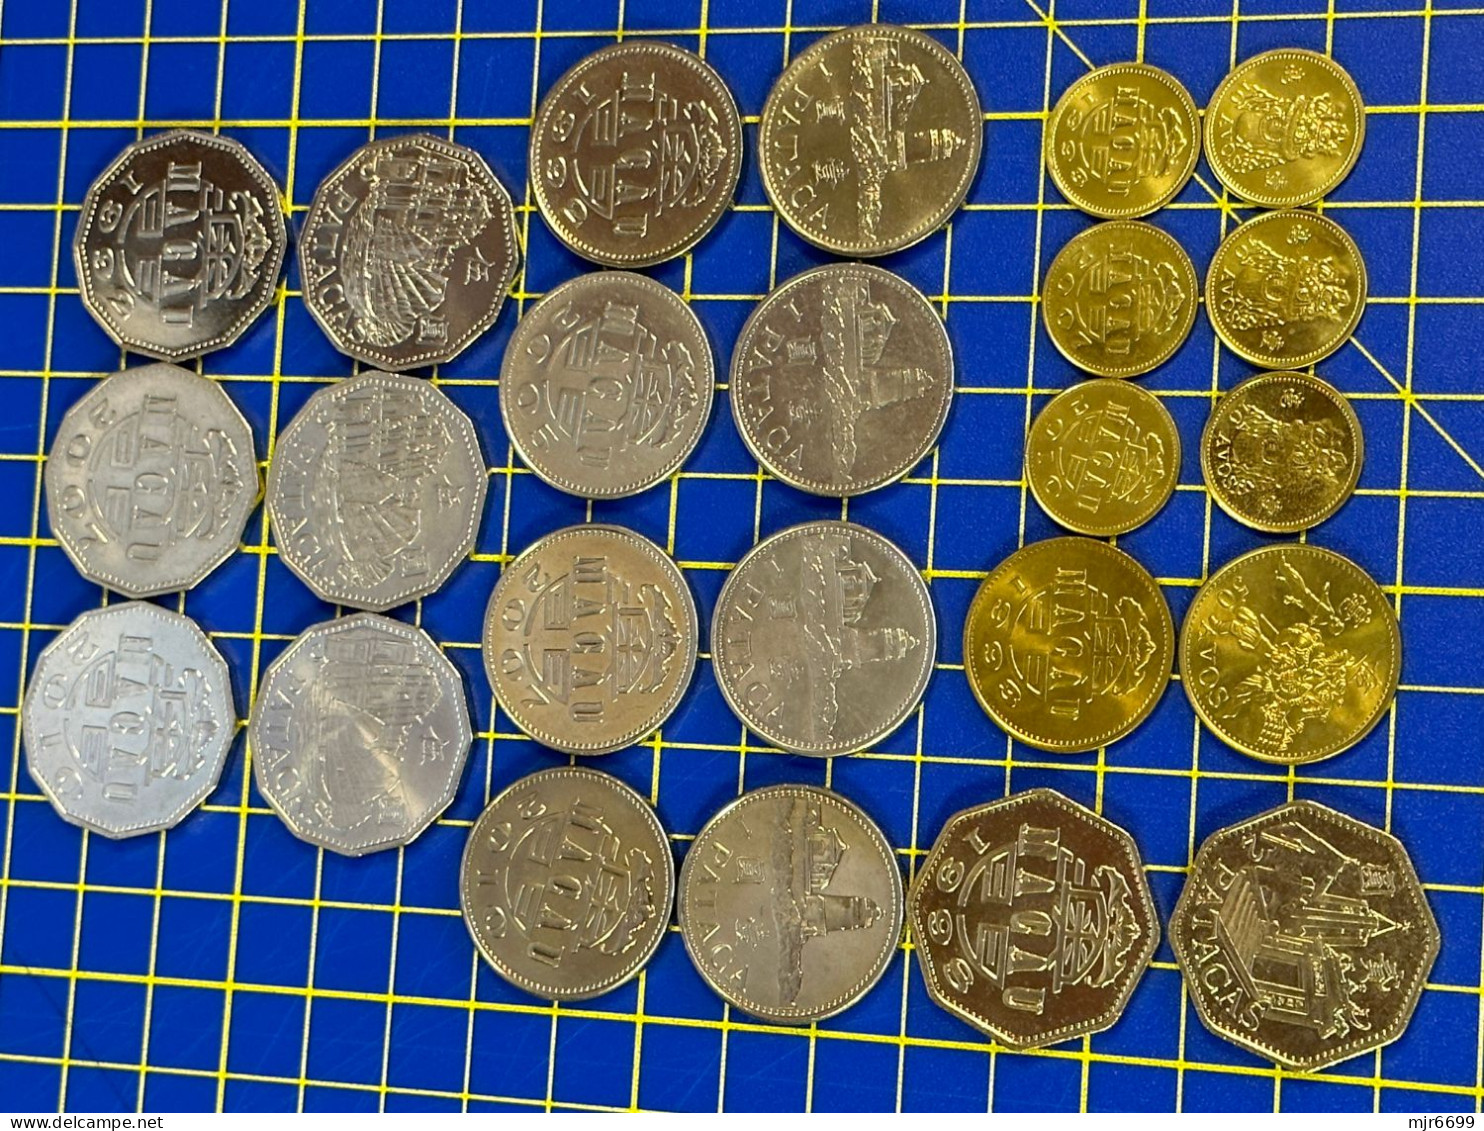 MACAU 1993 - 2010 COLLECTION OF 12 COINS, MOSTLY UNC+AUNC+VERYFINE USED. PHOTOS SHOWING BOTH SIDE OF THE COINS